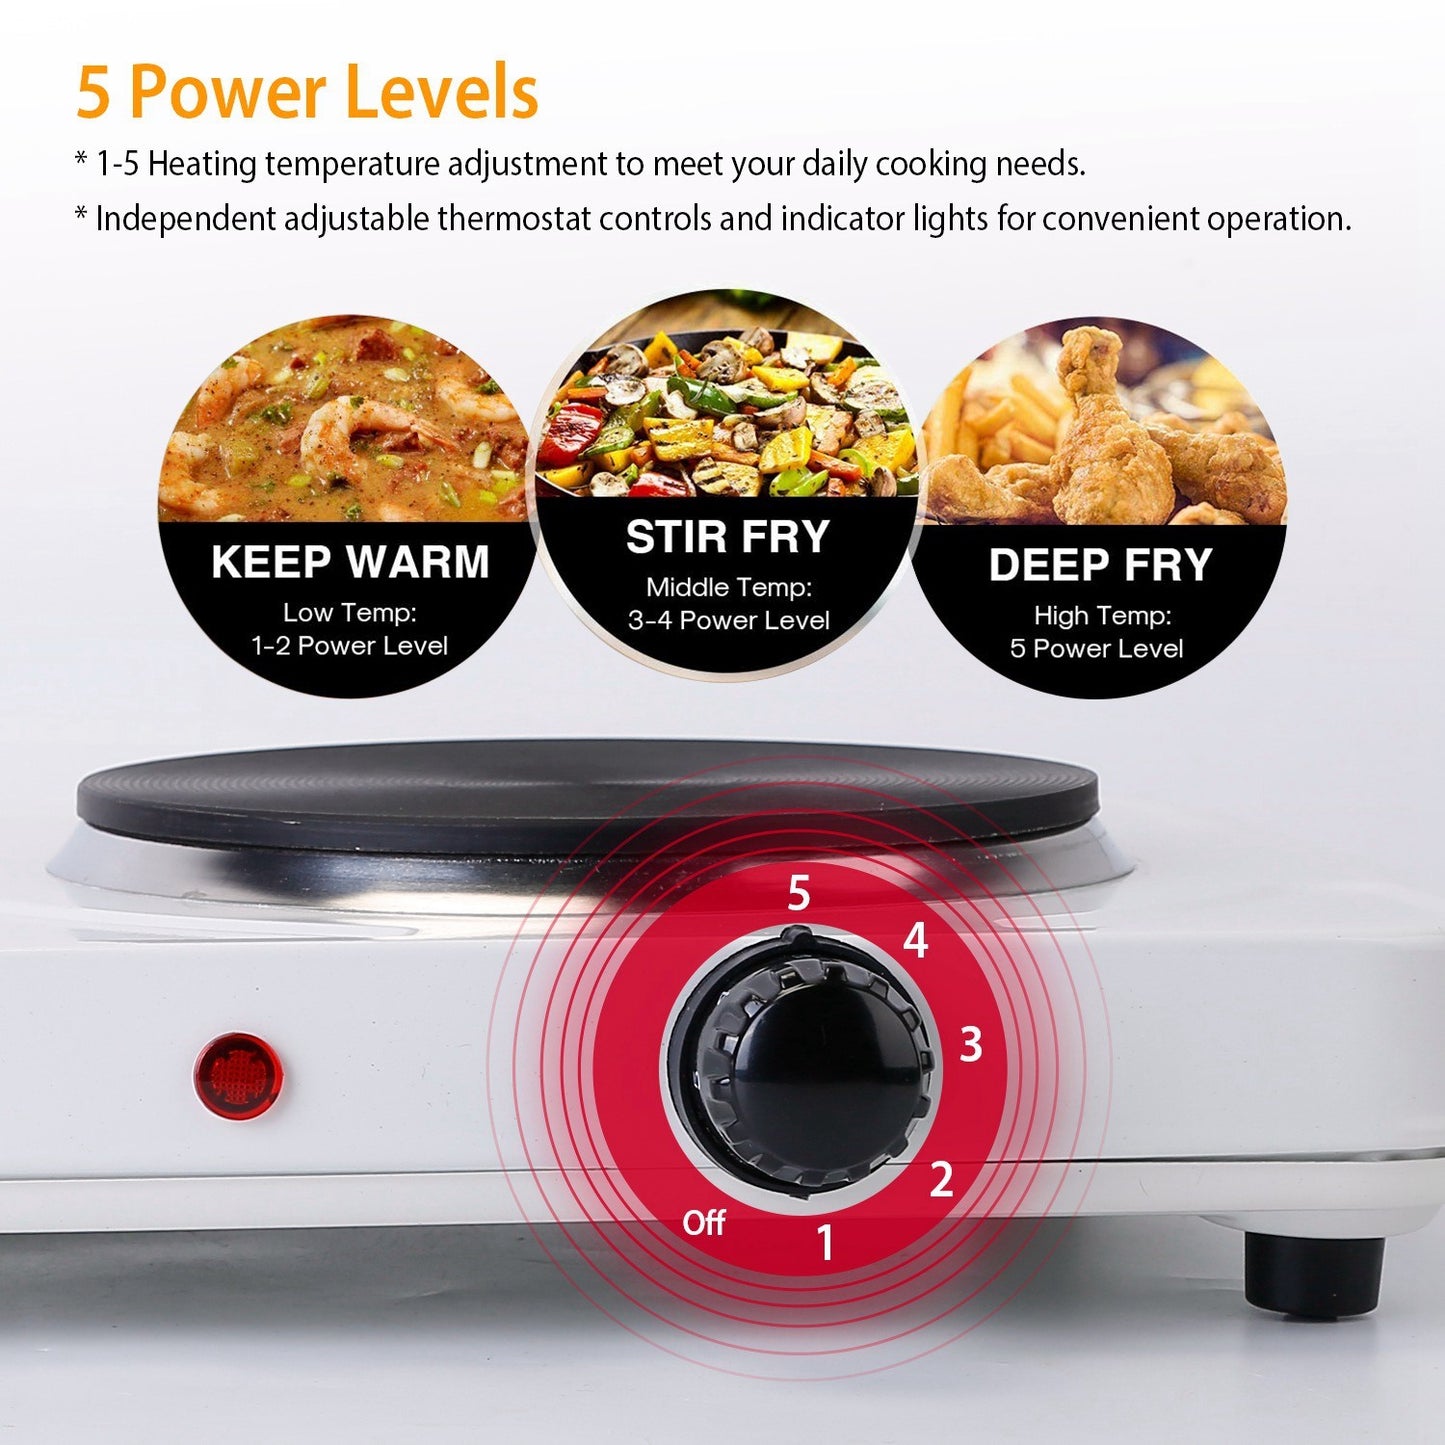 2000W Double Electric Burner Portable Dual Counter Stove Countertop Hot Plate Kitchen Cooker Stove with 5 Gear Temperature Control